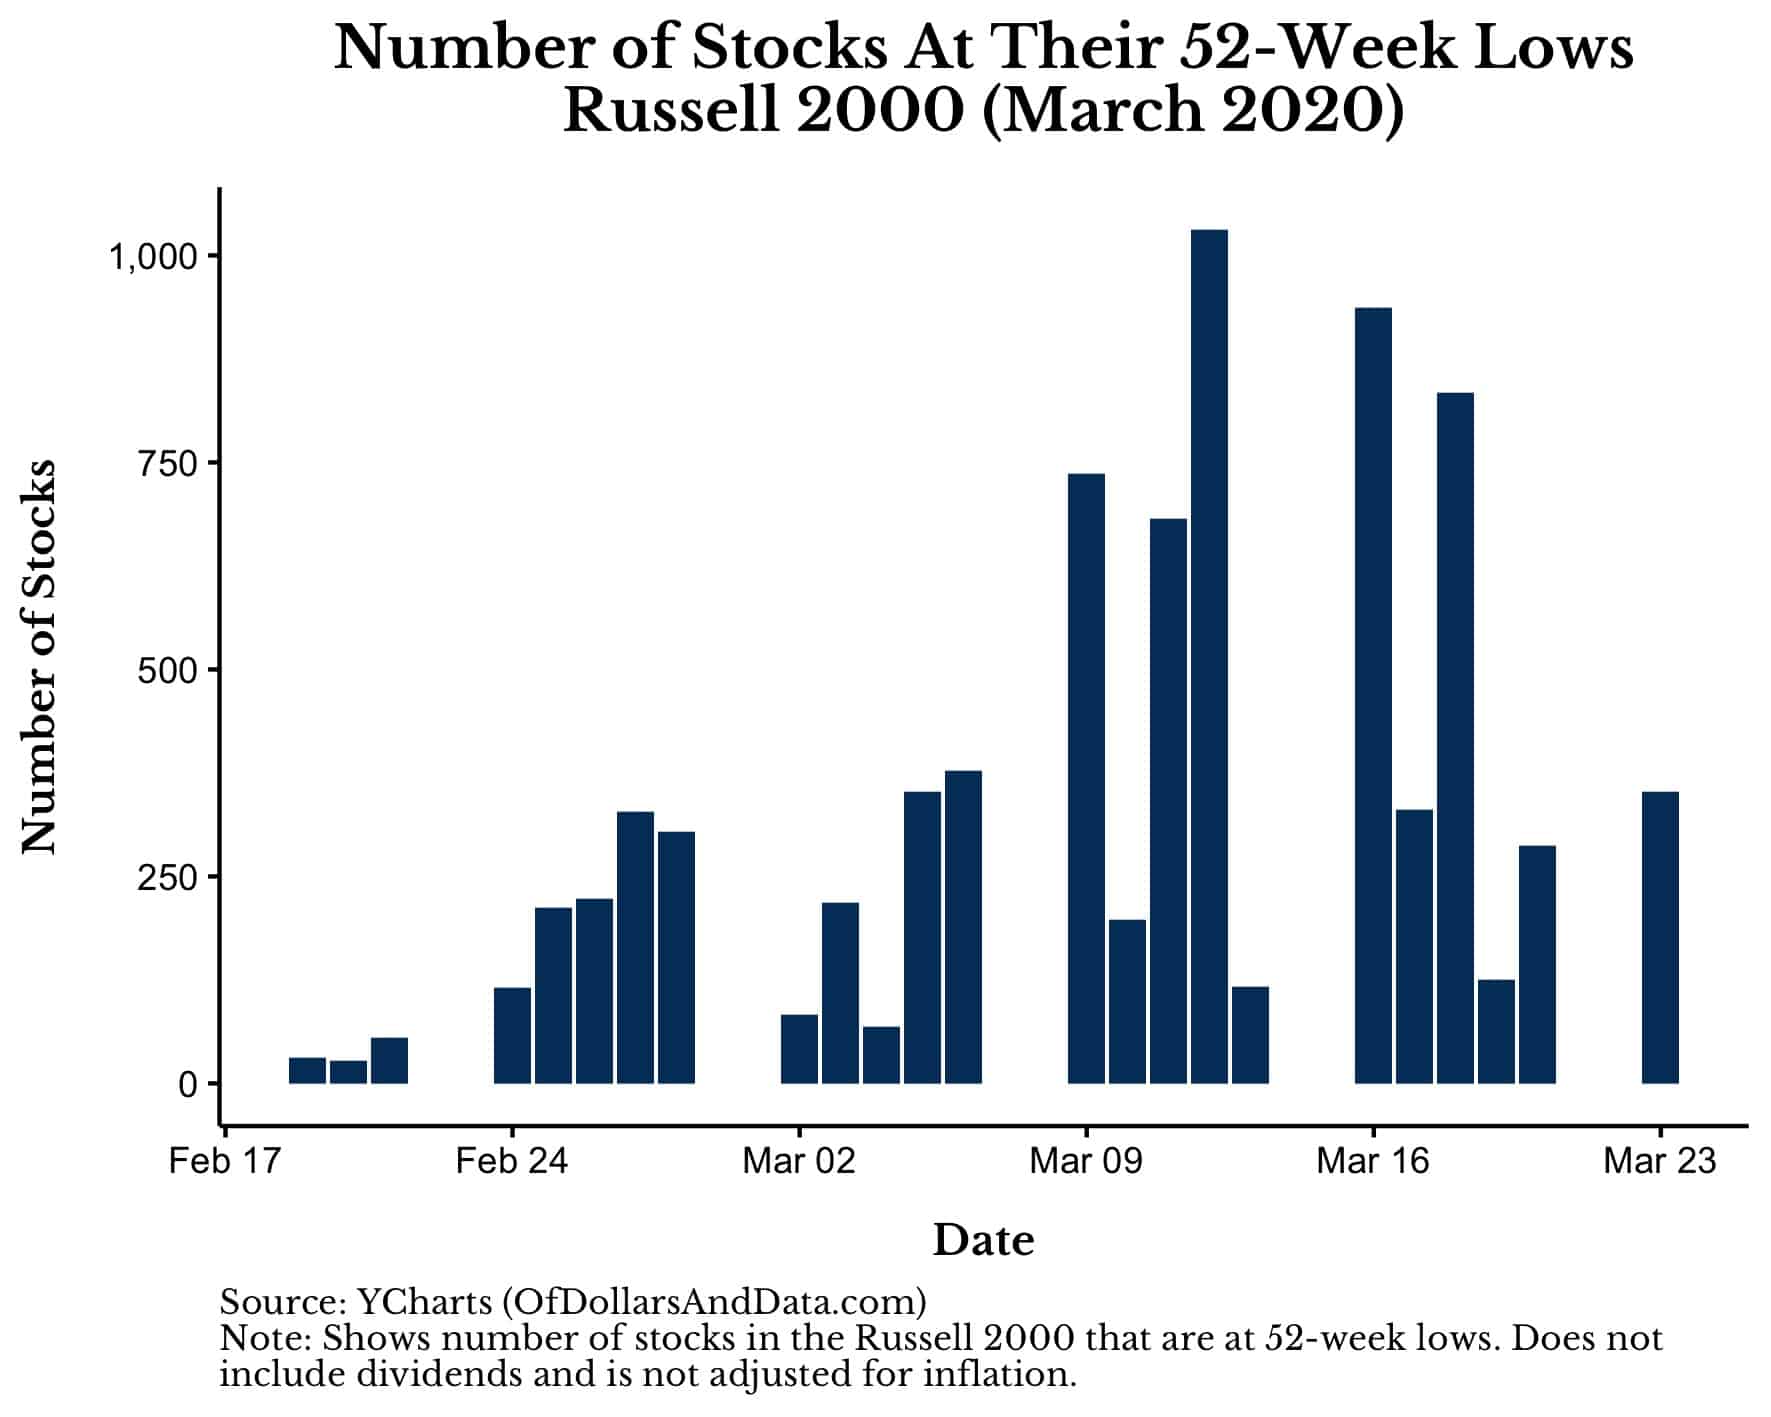 Number of Russell 2000 stocks at their 52-week lows around March 2020